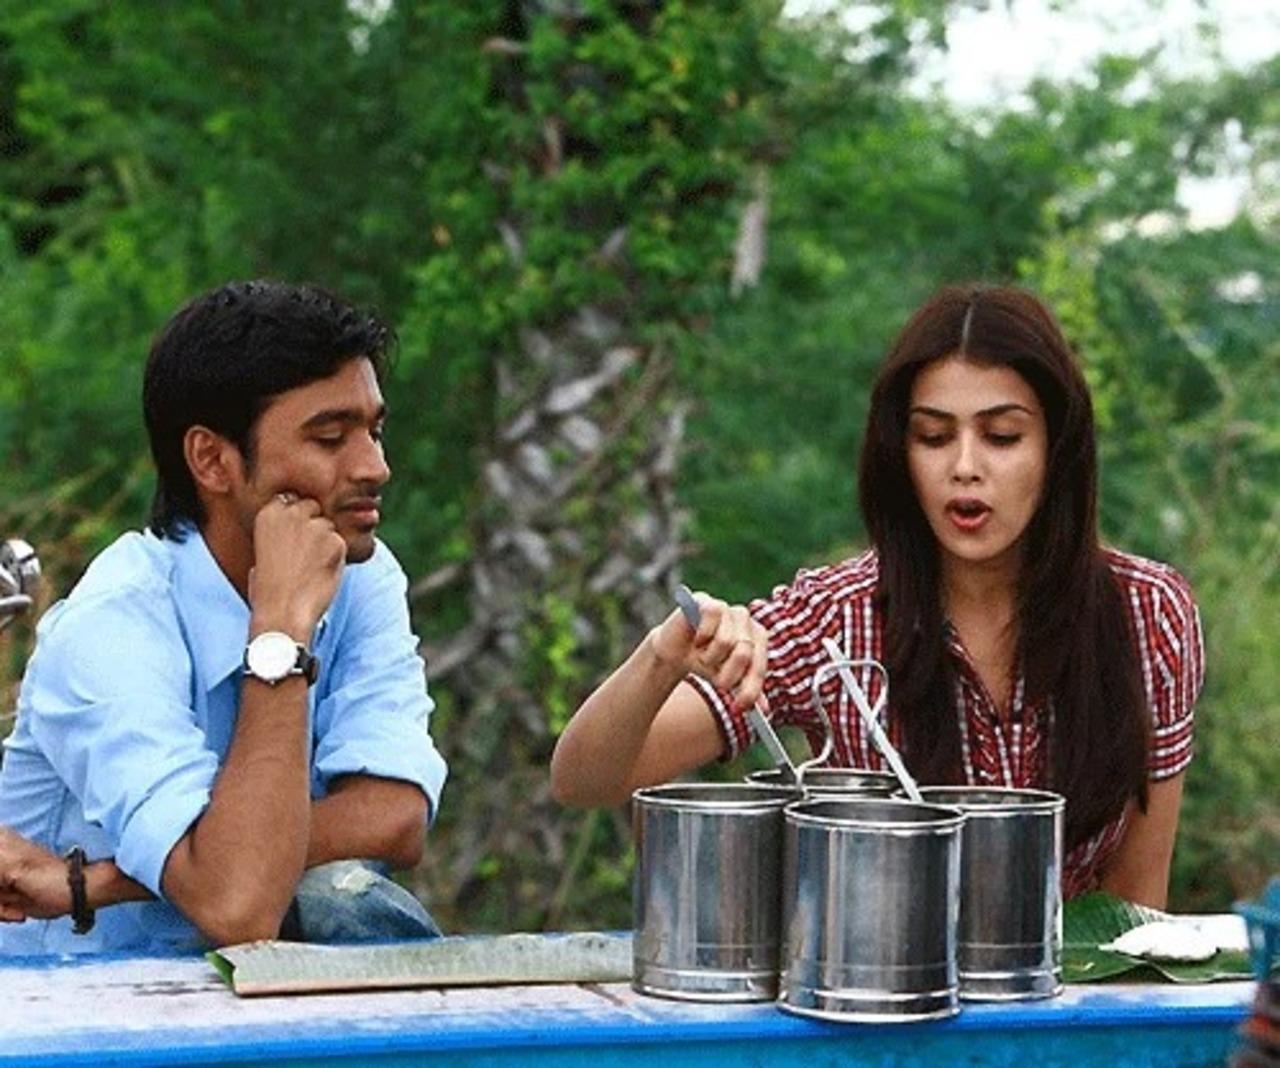 In 2010, Genelia featured alongside Dhanush in the Tamil film 'Uthamaputhiran' which was a moderate success